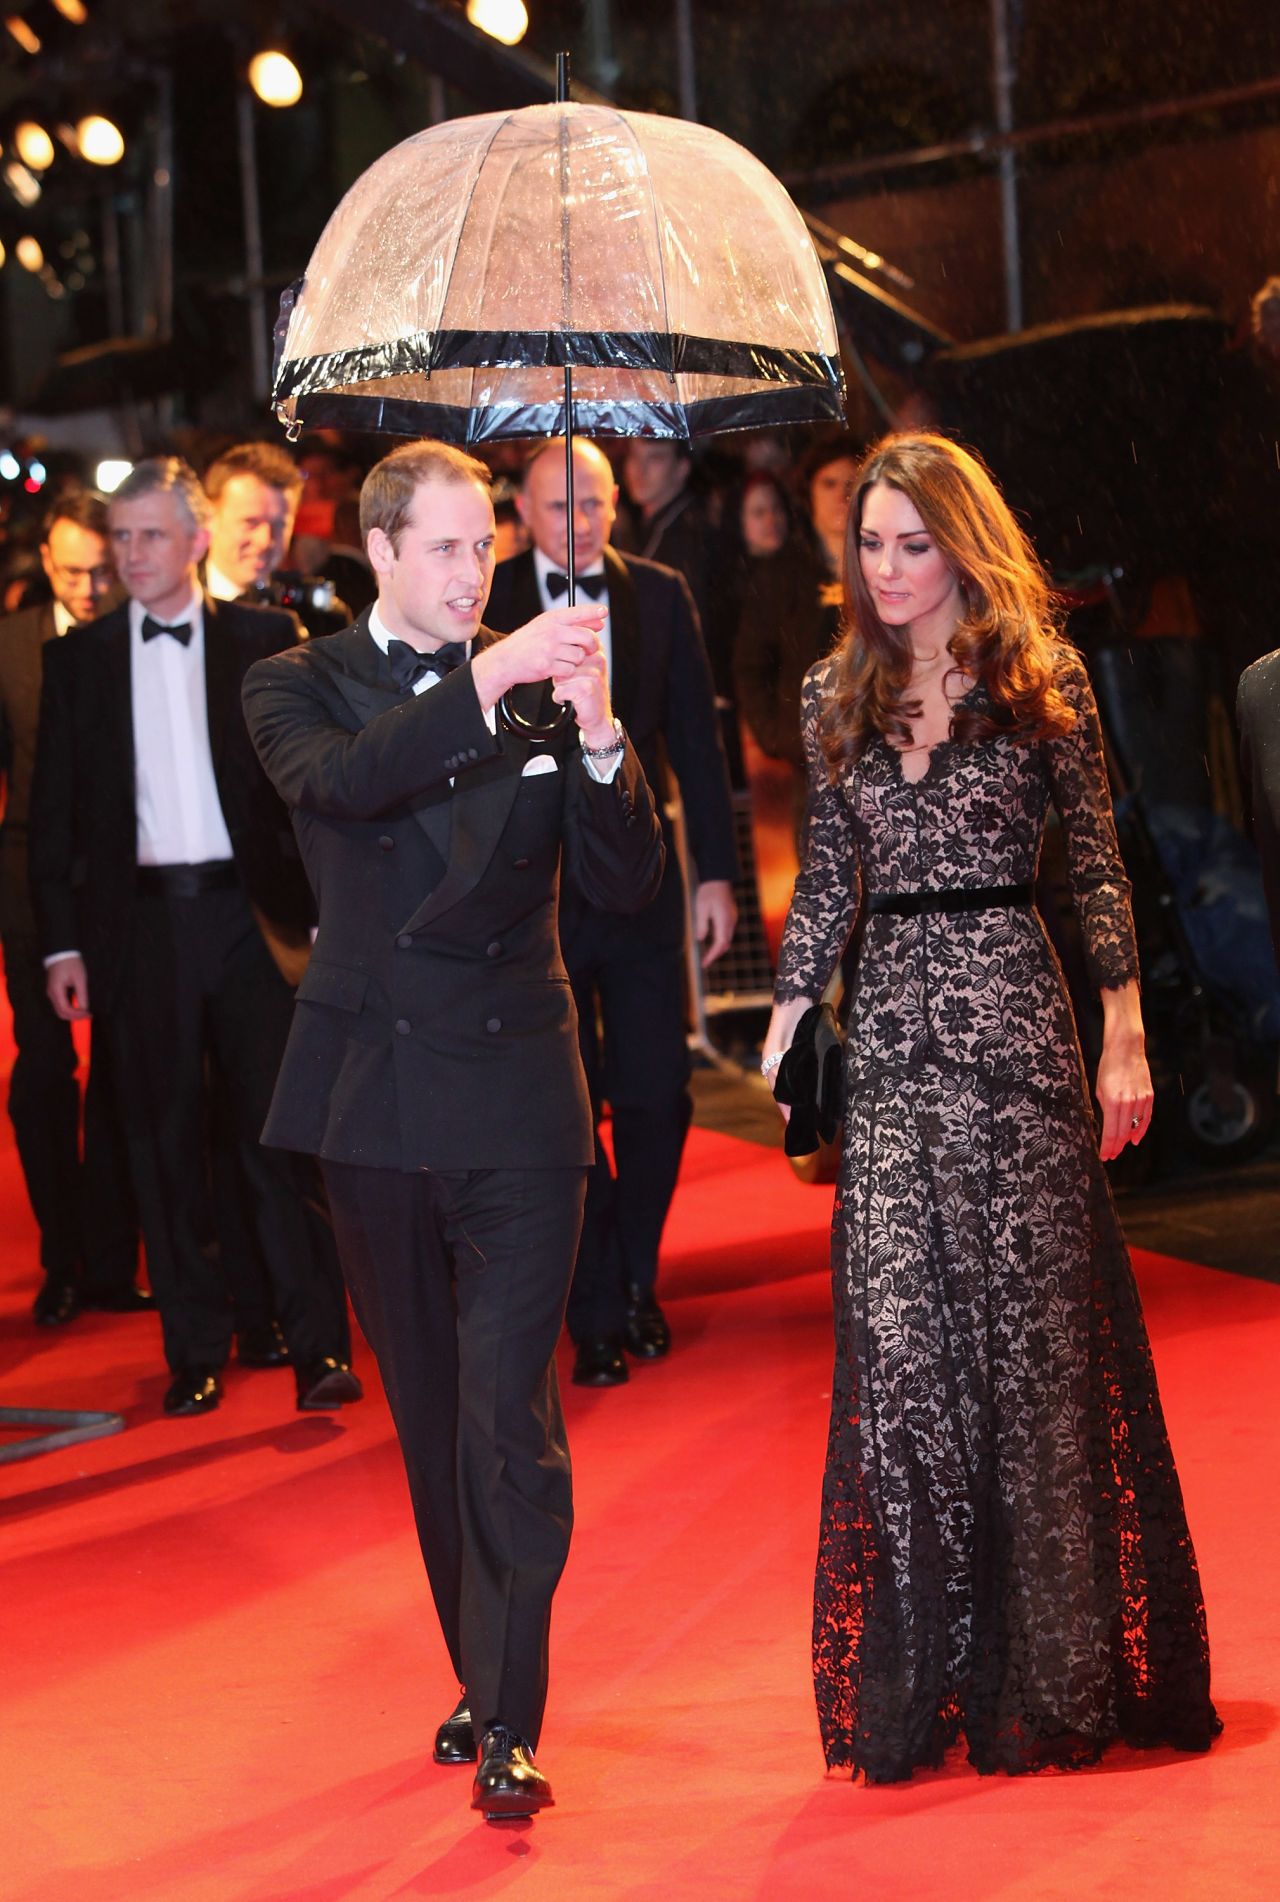 Prince William kept his wife dry at the London premiere of "War Horse" on January 8, 2012. She wore a black lace <a href="http://nymag.com/daily/fashion/2012/01/kate-middleton-war-horse-premiere-temperley.html" target="_blank" target="_blank">Alice by Temperley</a> gown and carried a black clutch.